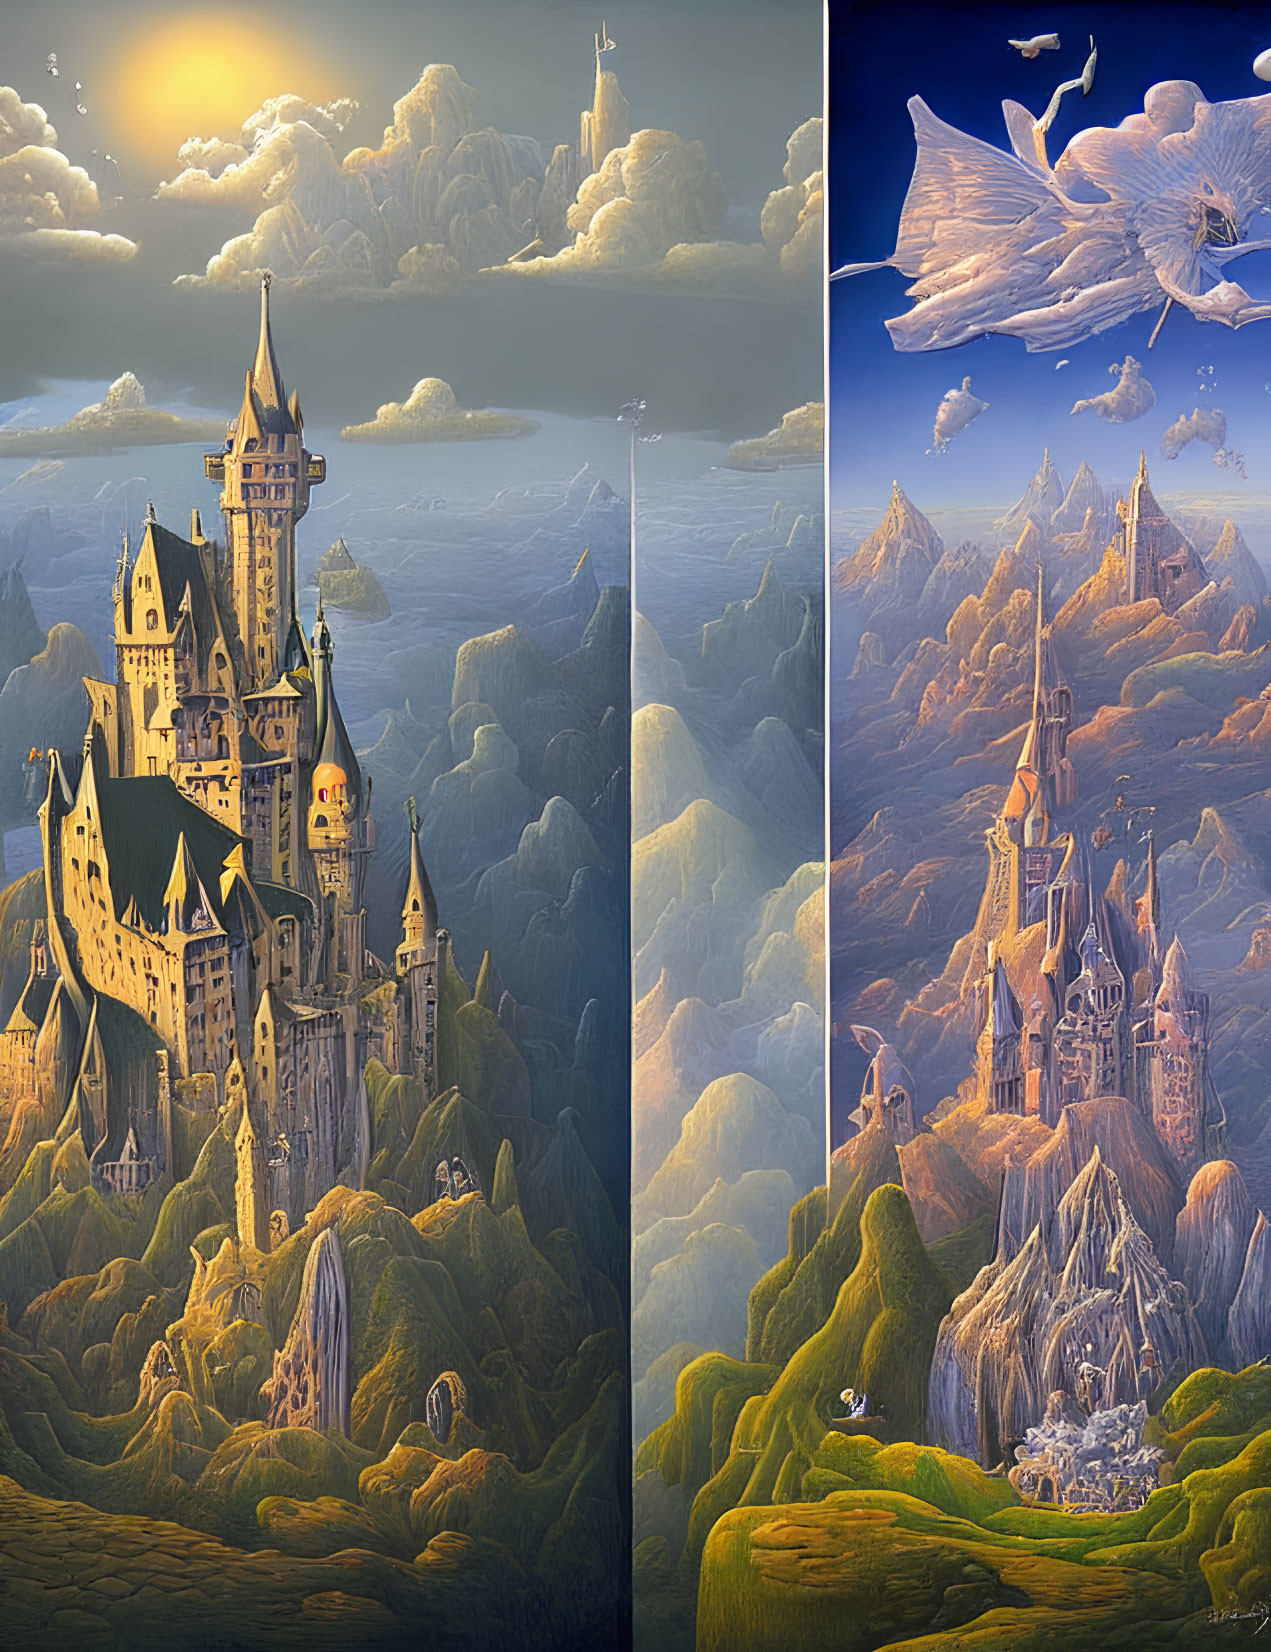 Split Fantasy Image: Majestic Castle and Floating Islands with Dragon Attack at Twilight